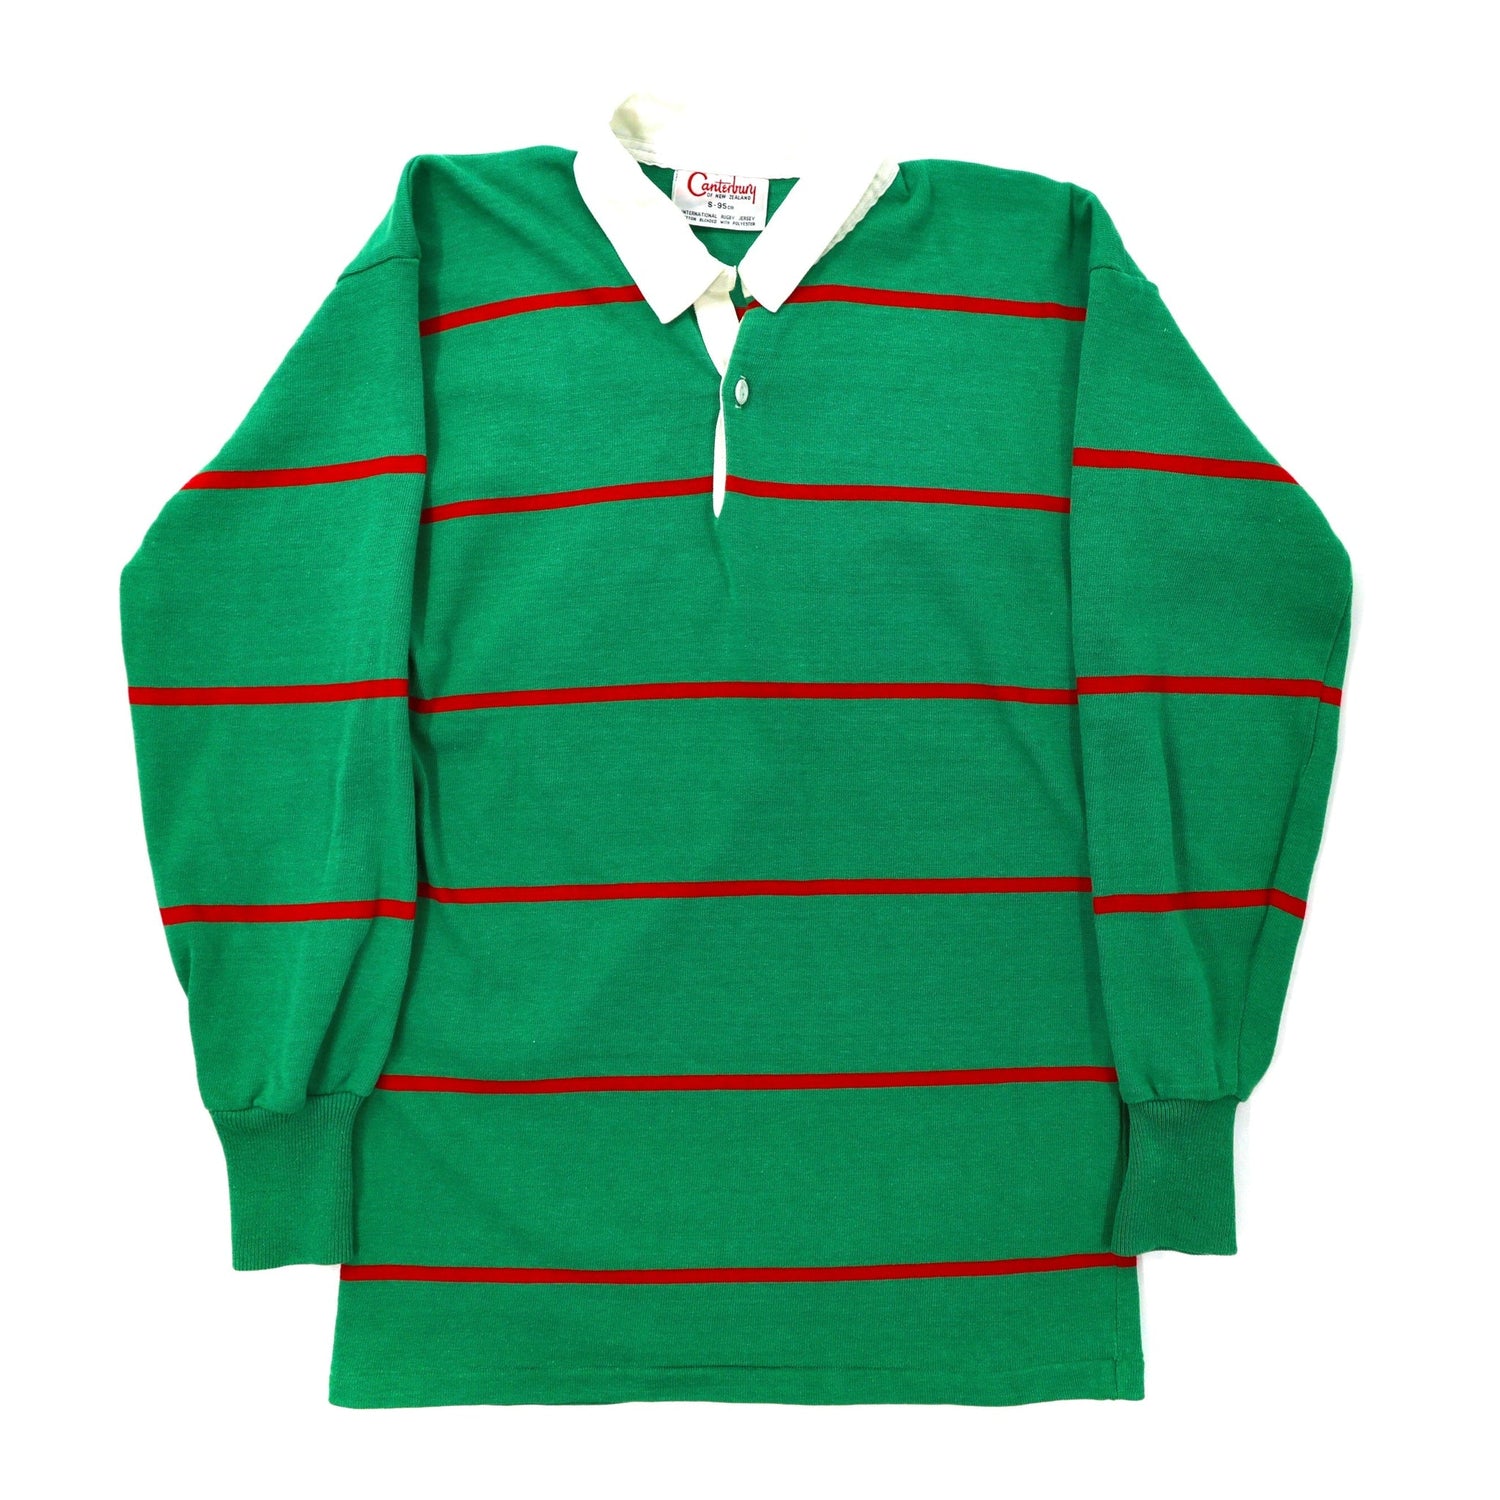 CANTERBURY RUGBY SHIRT S Green Striped Cotton 80s